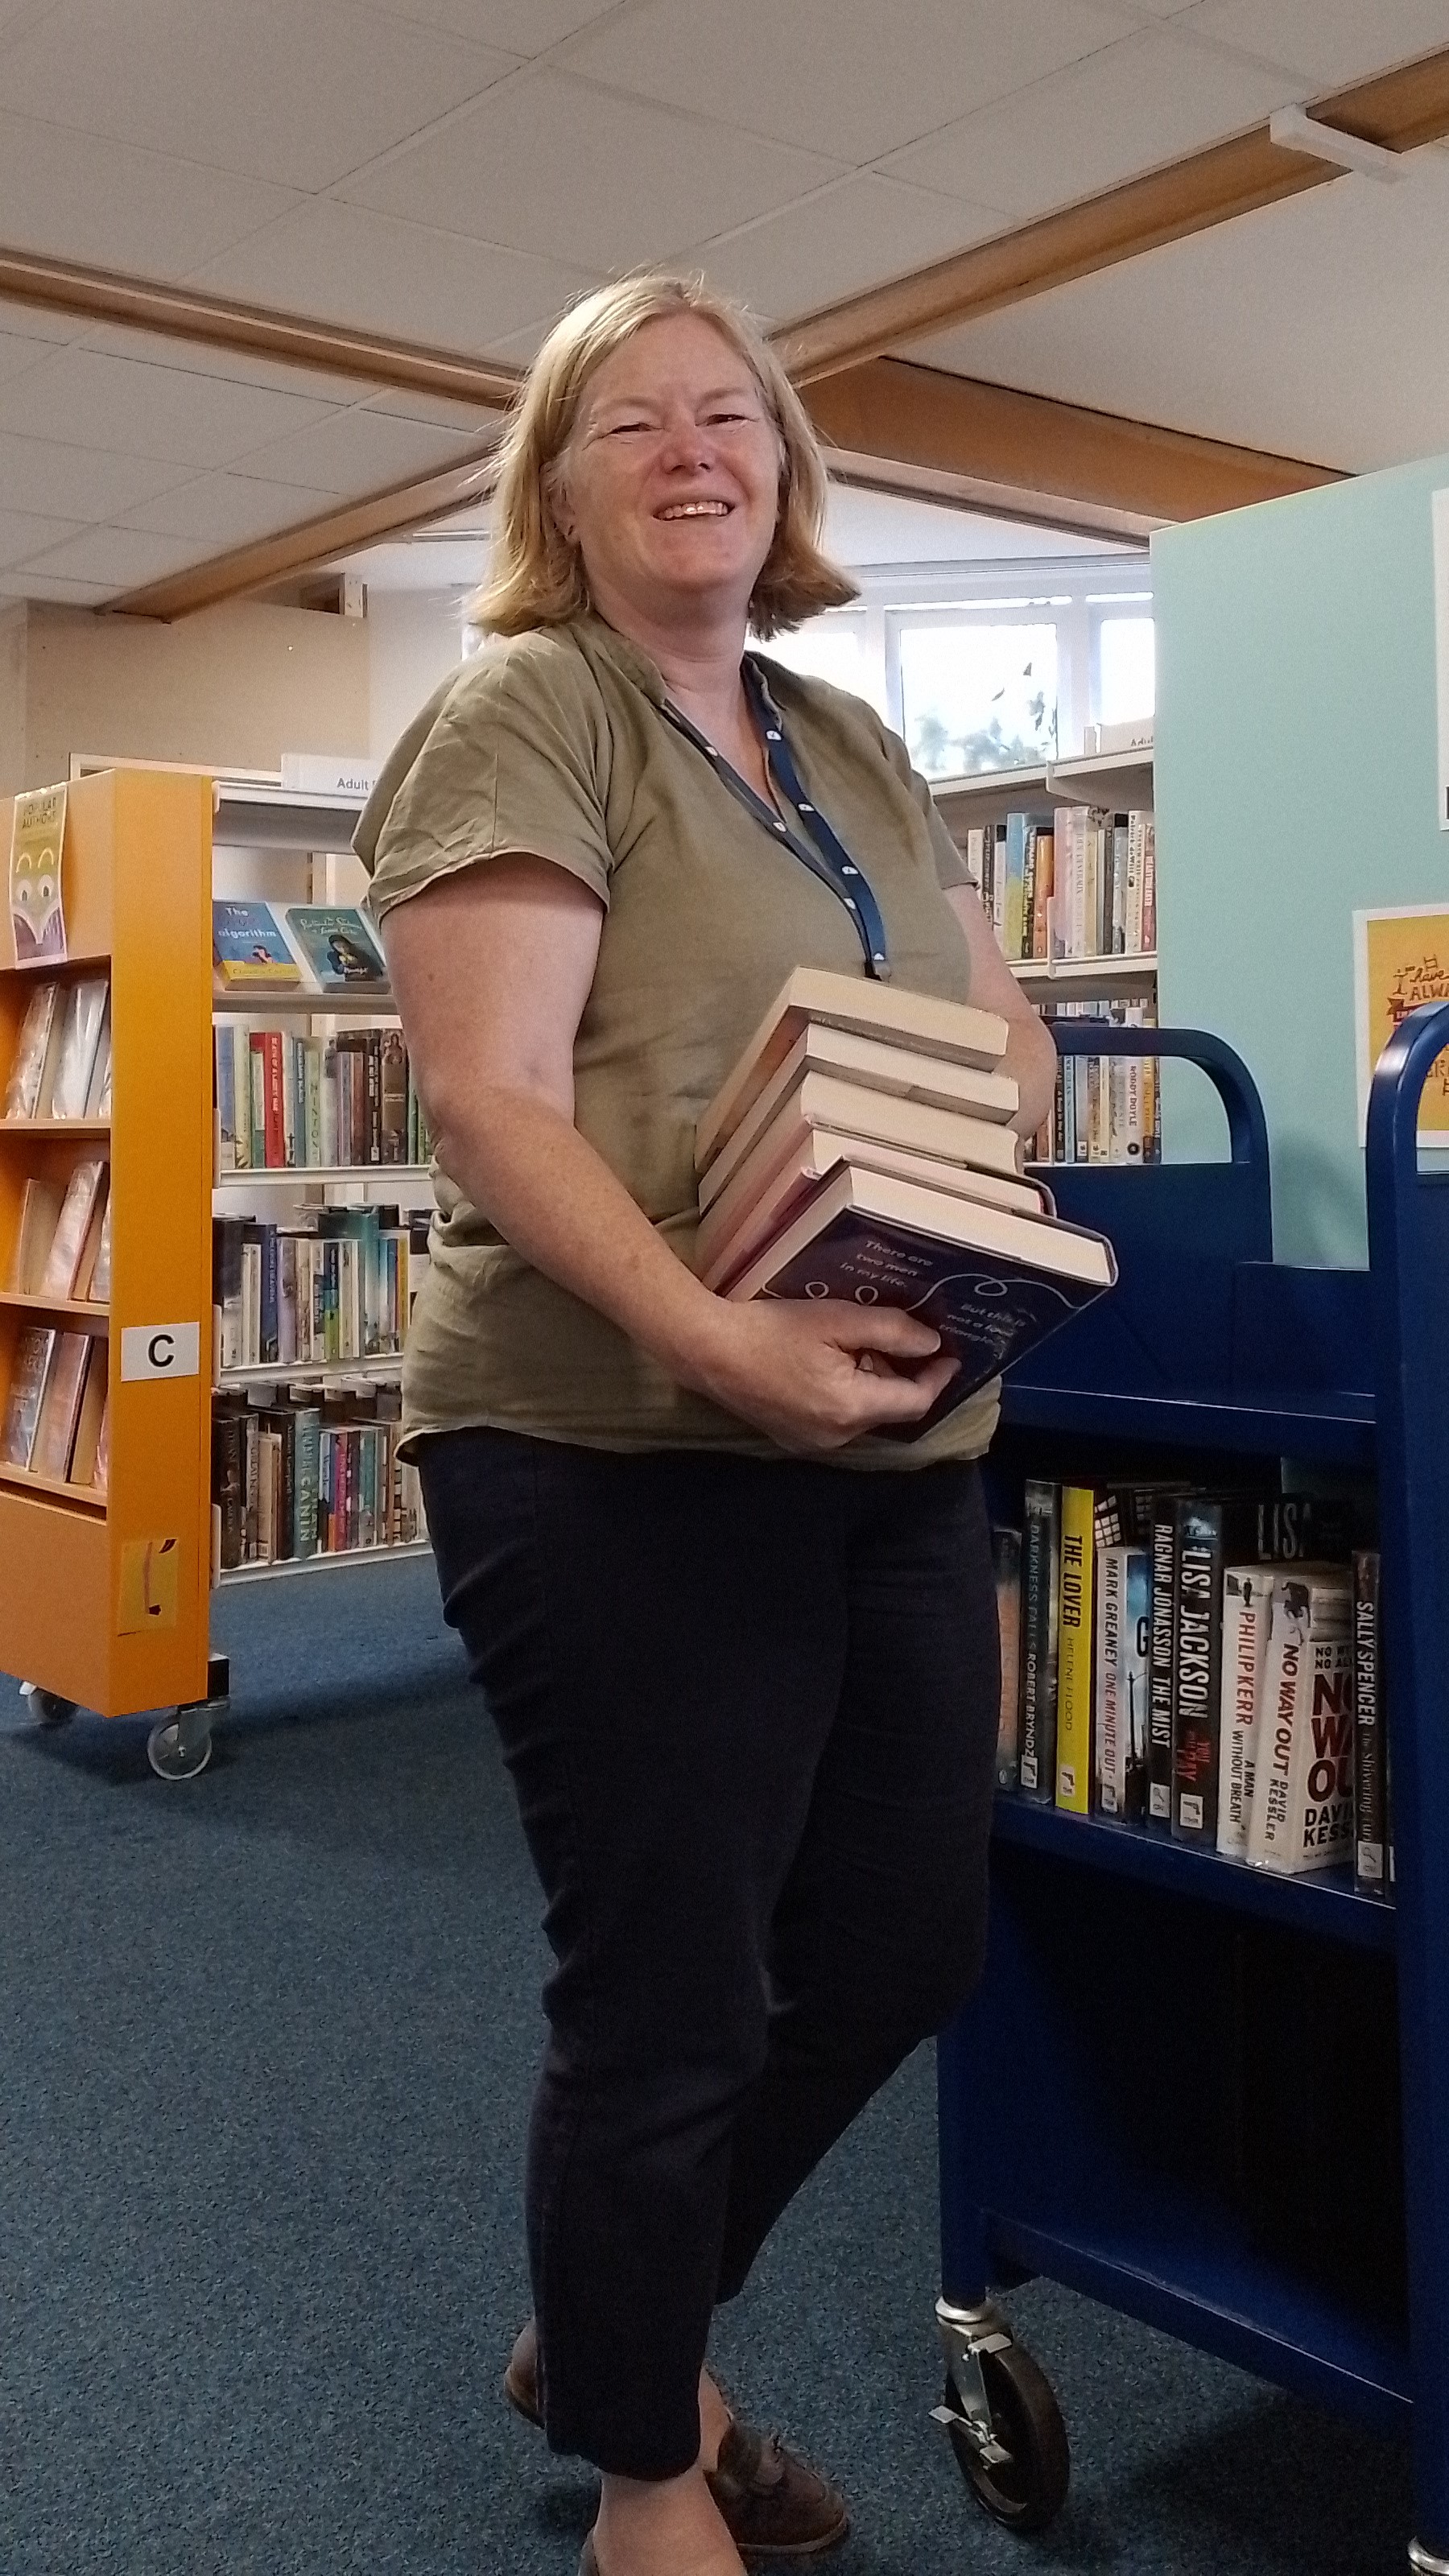 This is a picture of a library assistant holding a stack of books, standing and smiling at the camera.  There are shelves of books behind them.